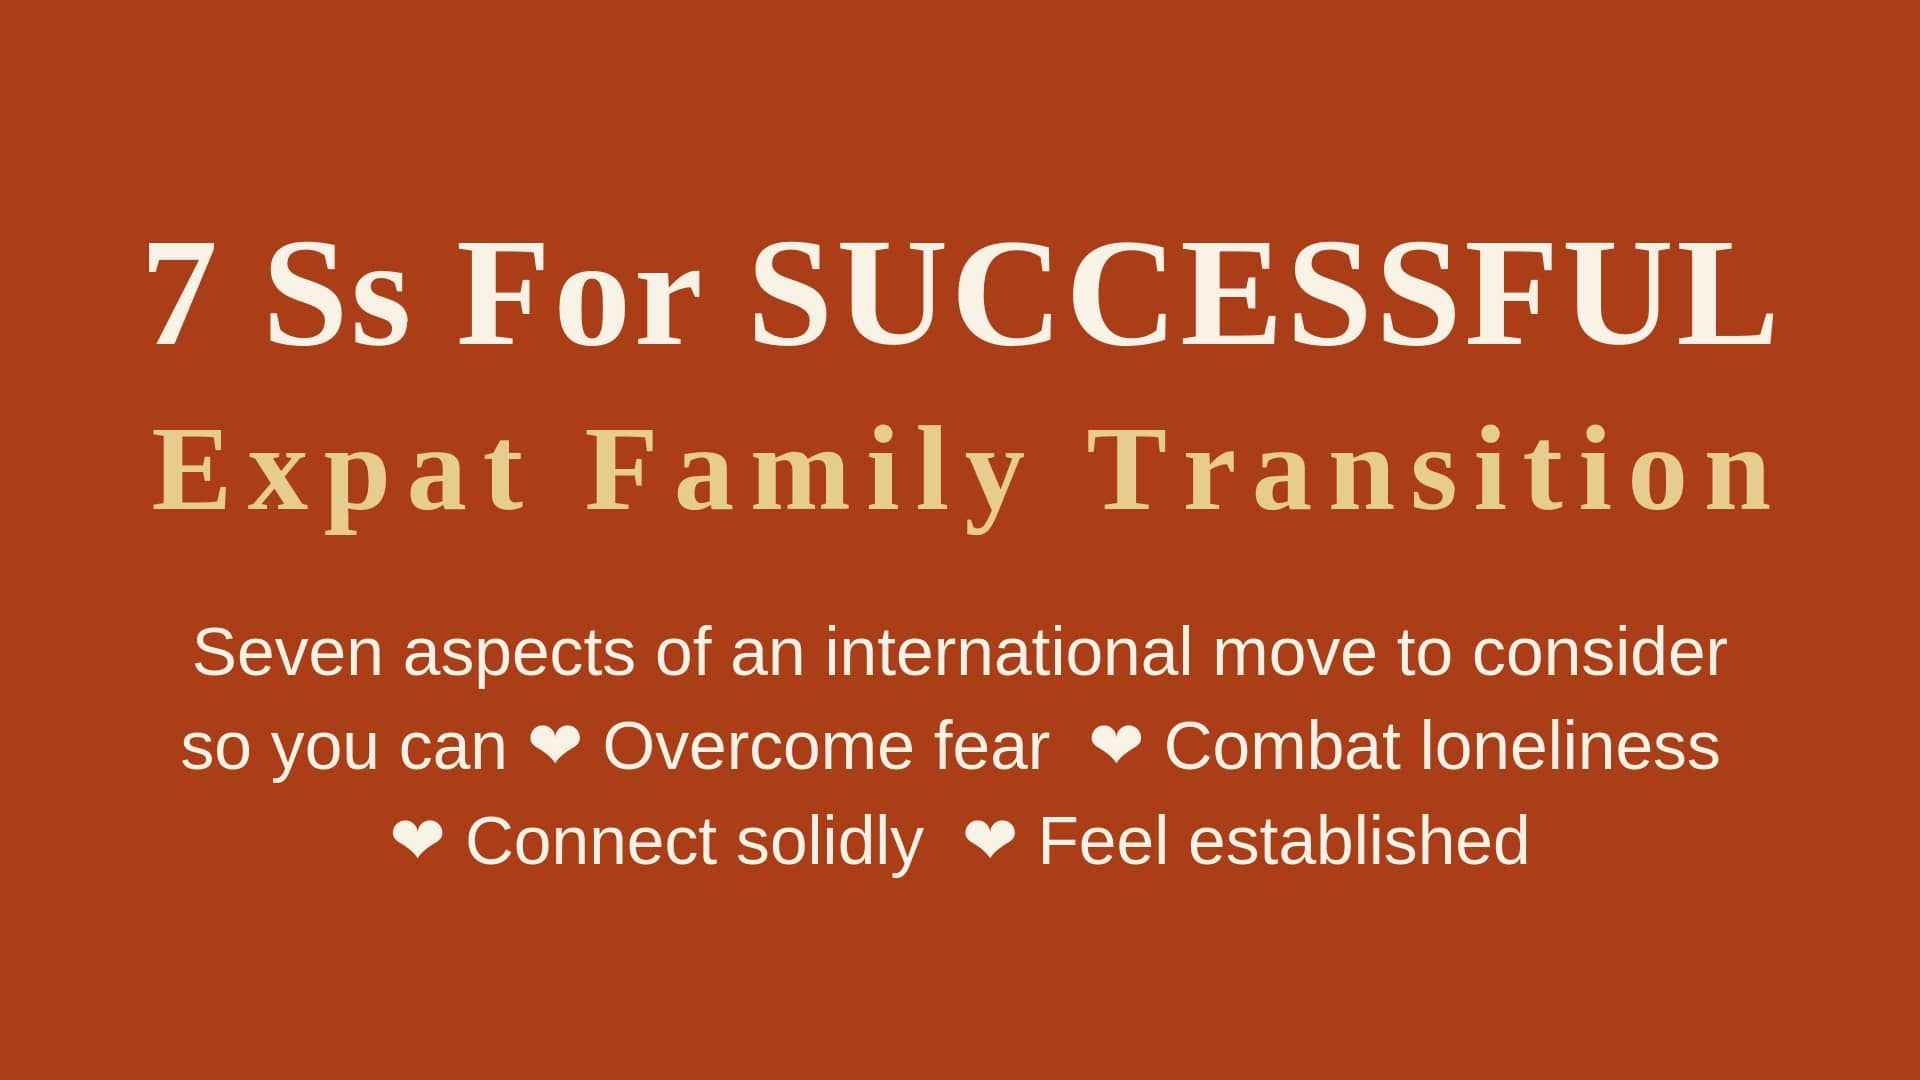 Resilient Expats 7 Ss for Successful Expat Family Transition